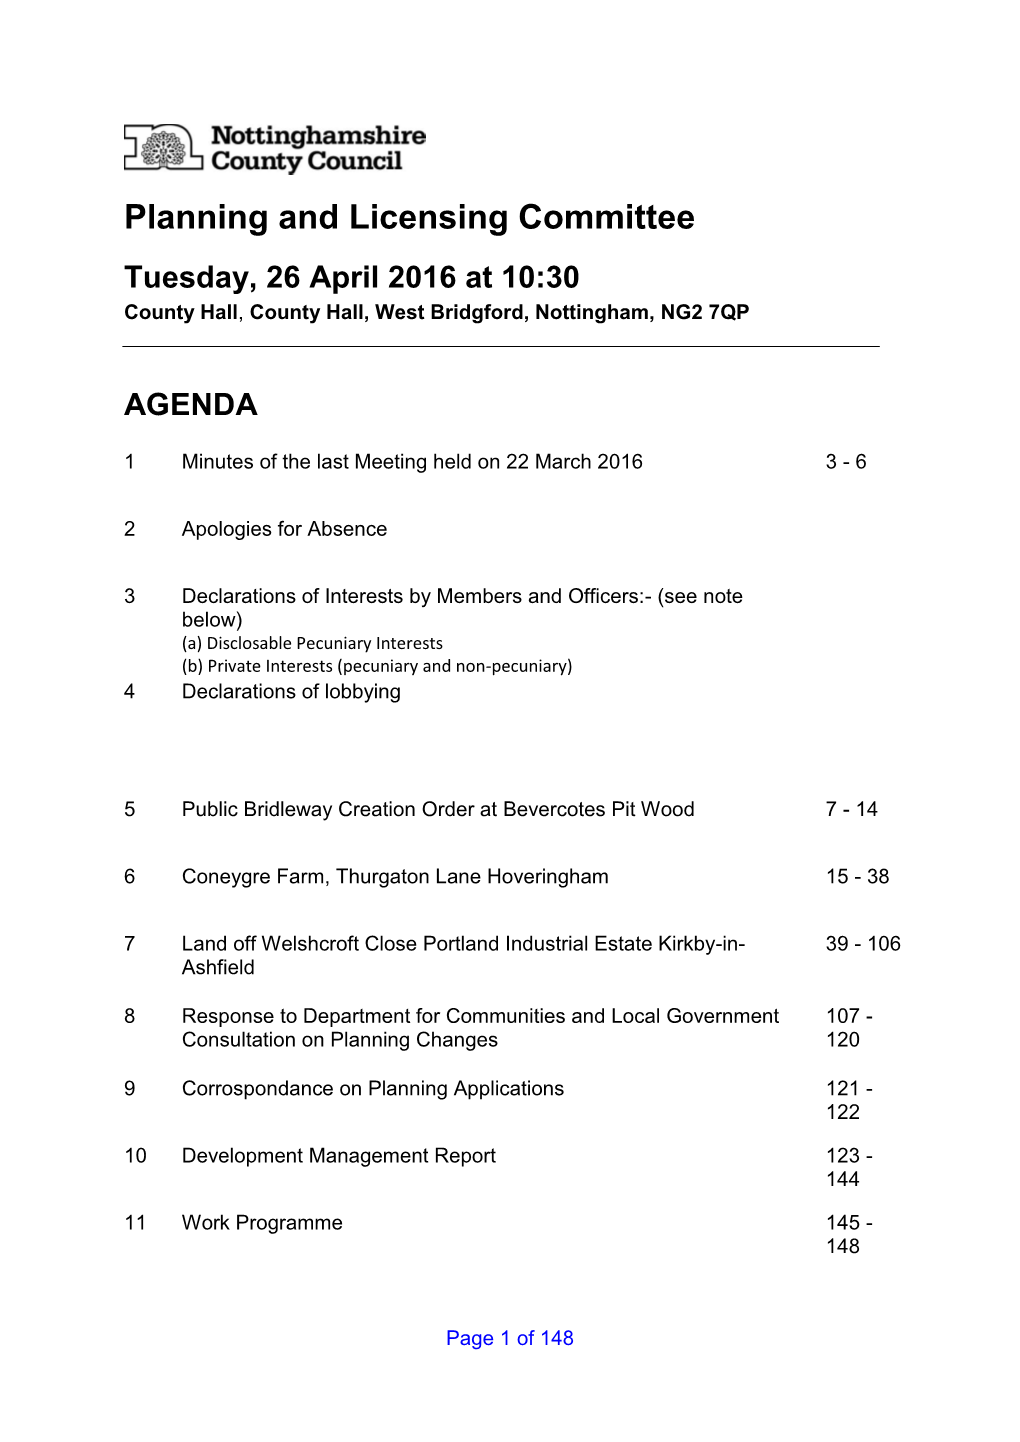 Planning and Licensing Committee Tuesday, 26 April 2016 at 10:30 County Hall, County Hall, West Bridgford, Nottingham, NG2 7QP